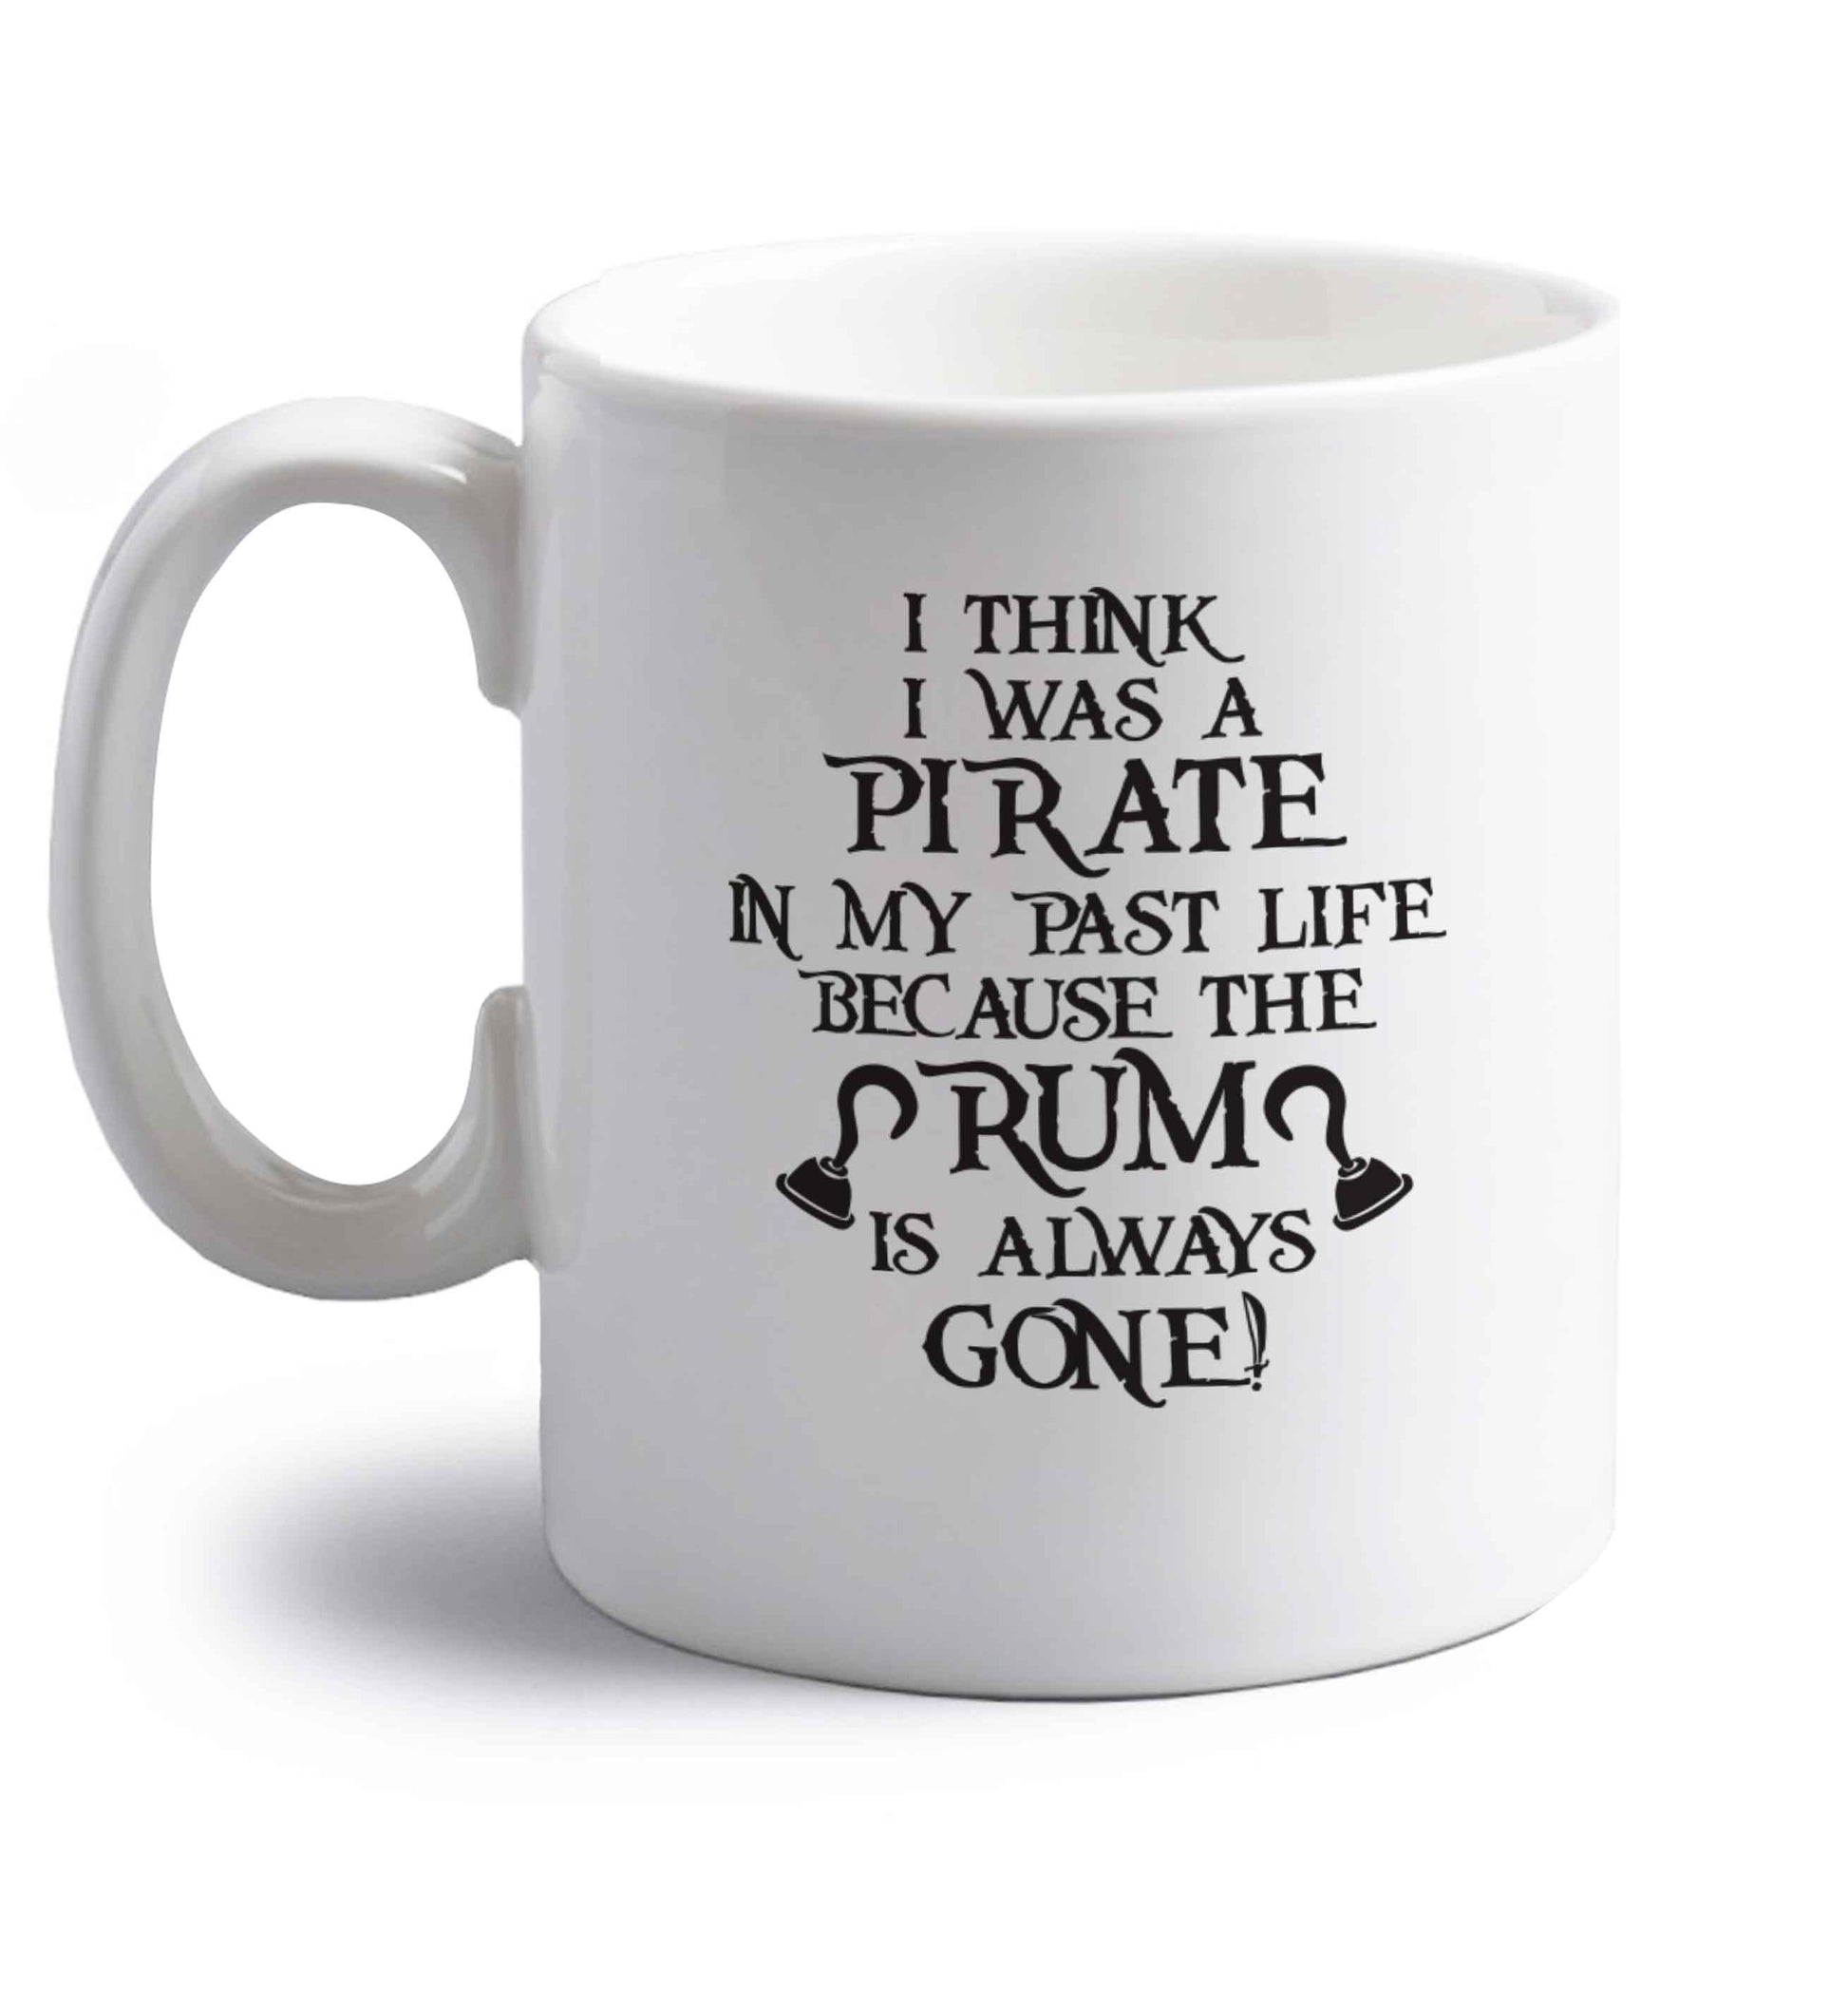 I think I was a pirate in my past life the rum is always gone right handed white ceramic mug 